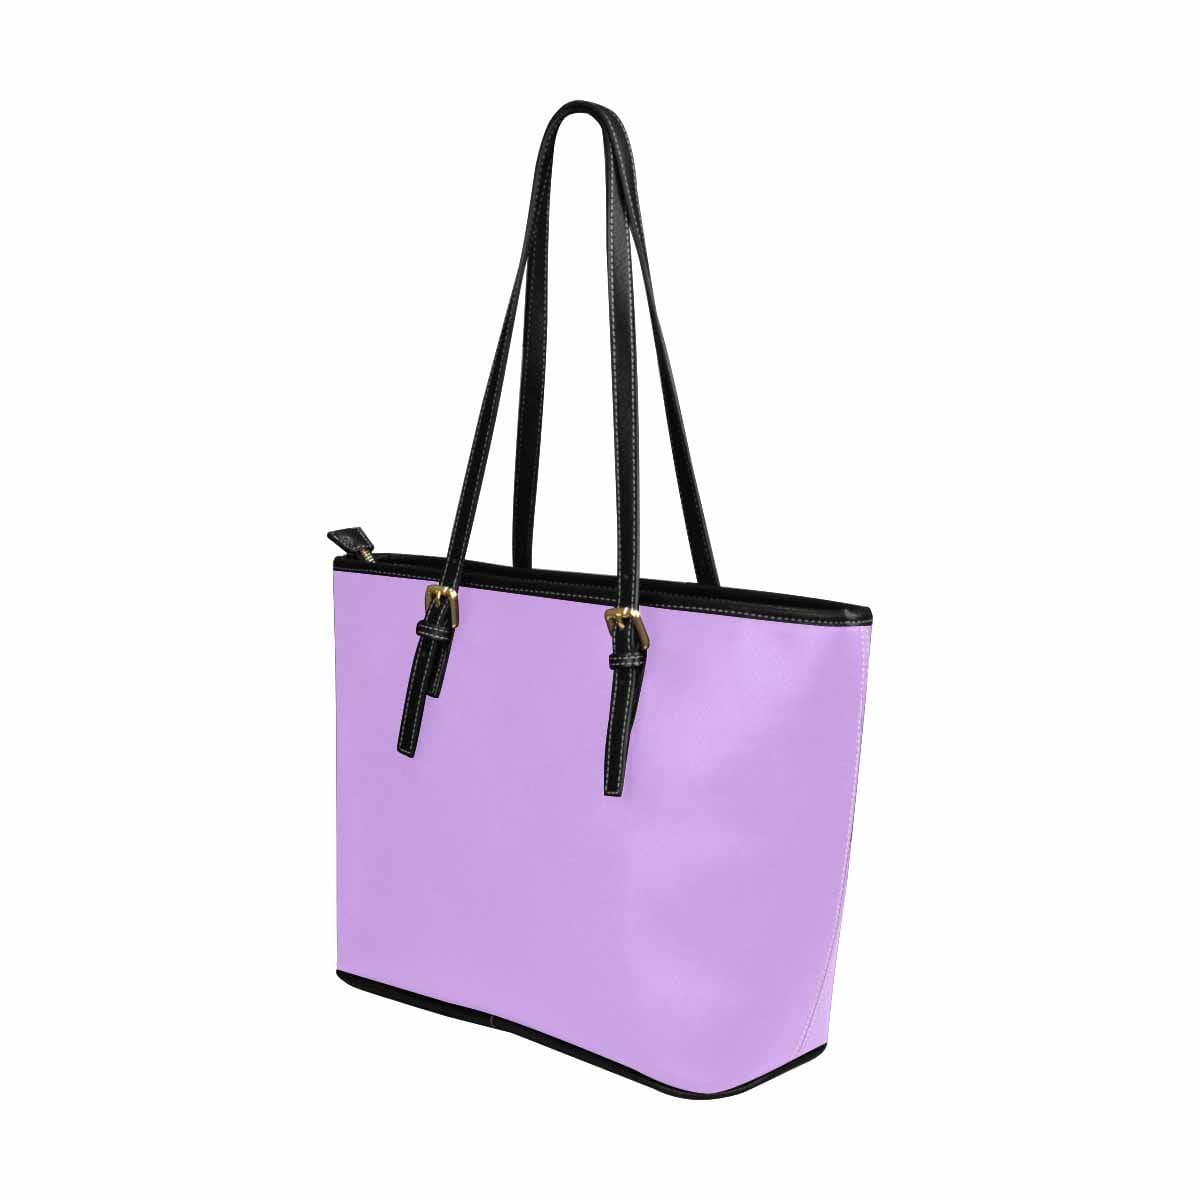 Large Leather Tote Shoulder Bag - Large Light Purple - Bags | Leather Tote Bags